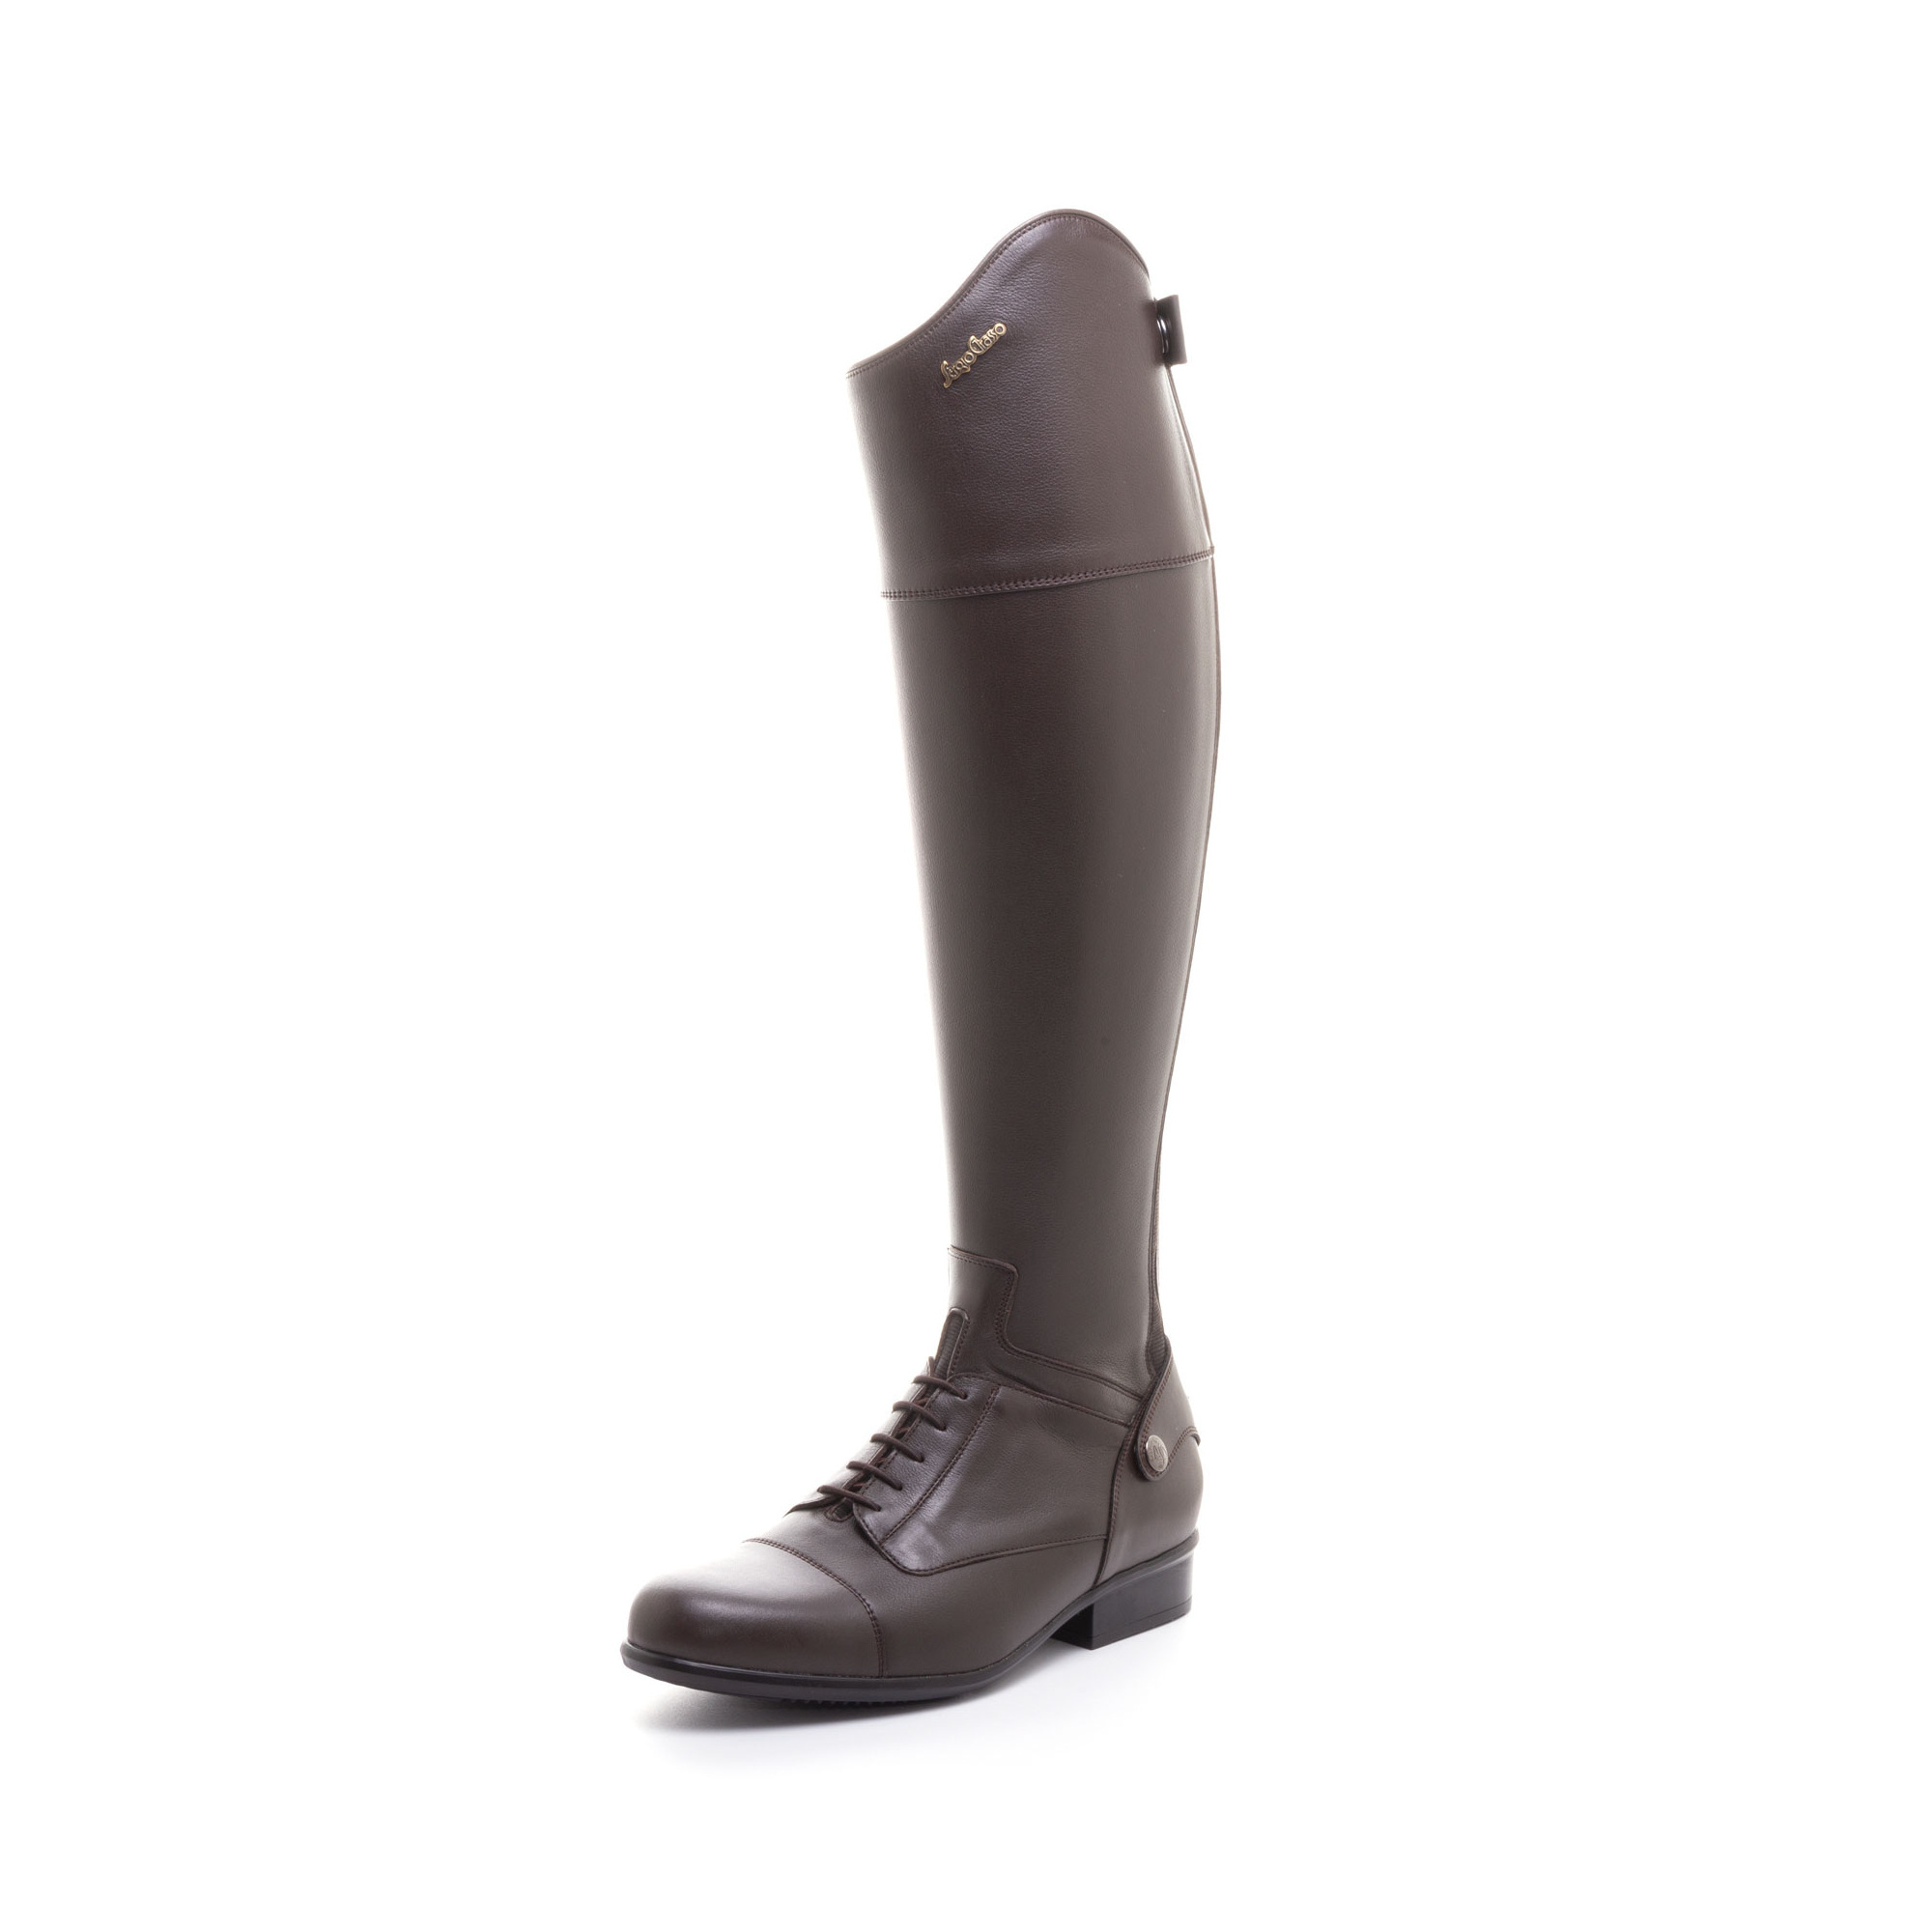 Adults Trouser Style Winter HKM Reitstiefel